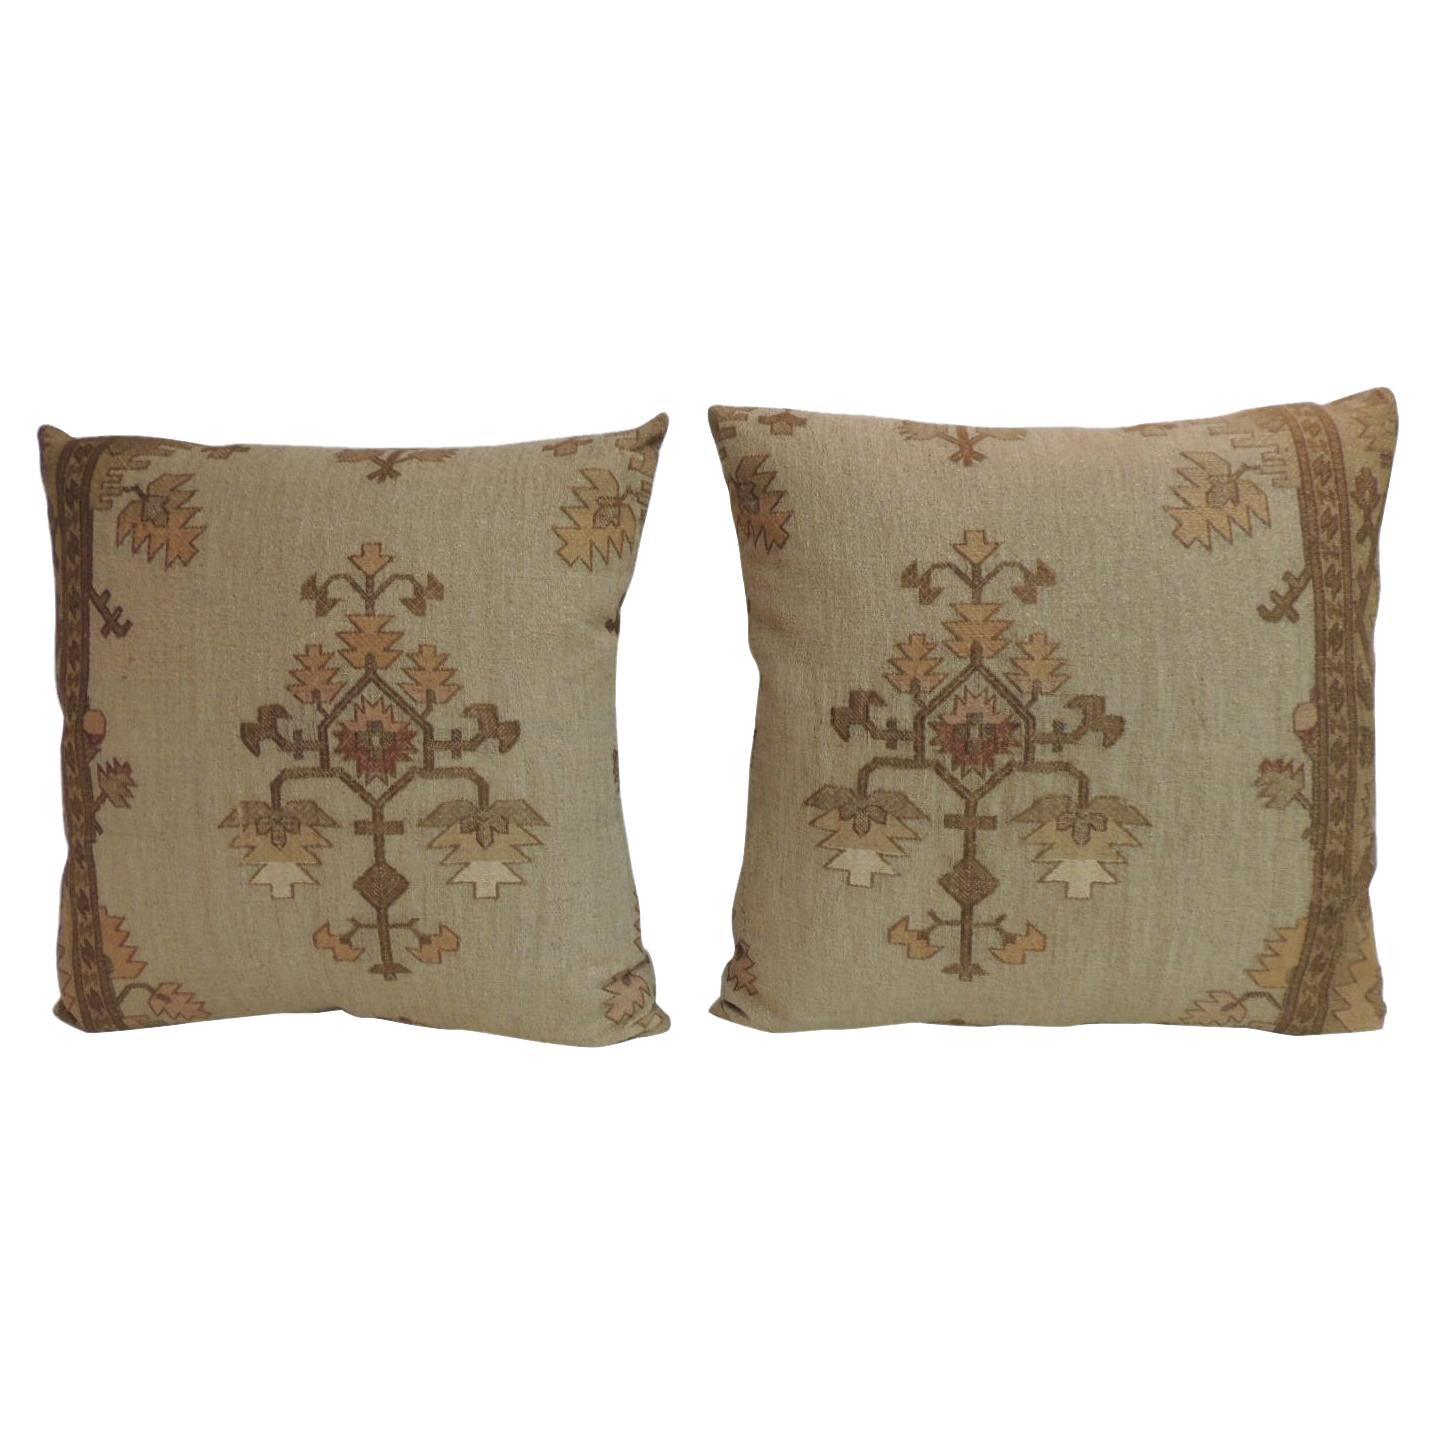 Pair of Gold Metallic Threads Embroidered Turkish Decorative Pillows